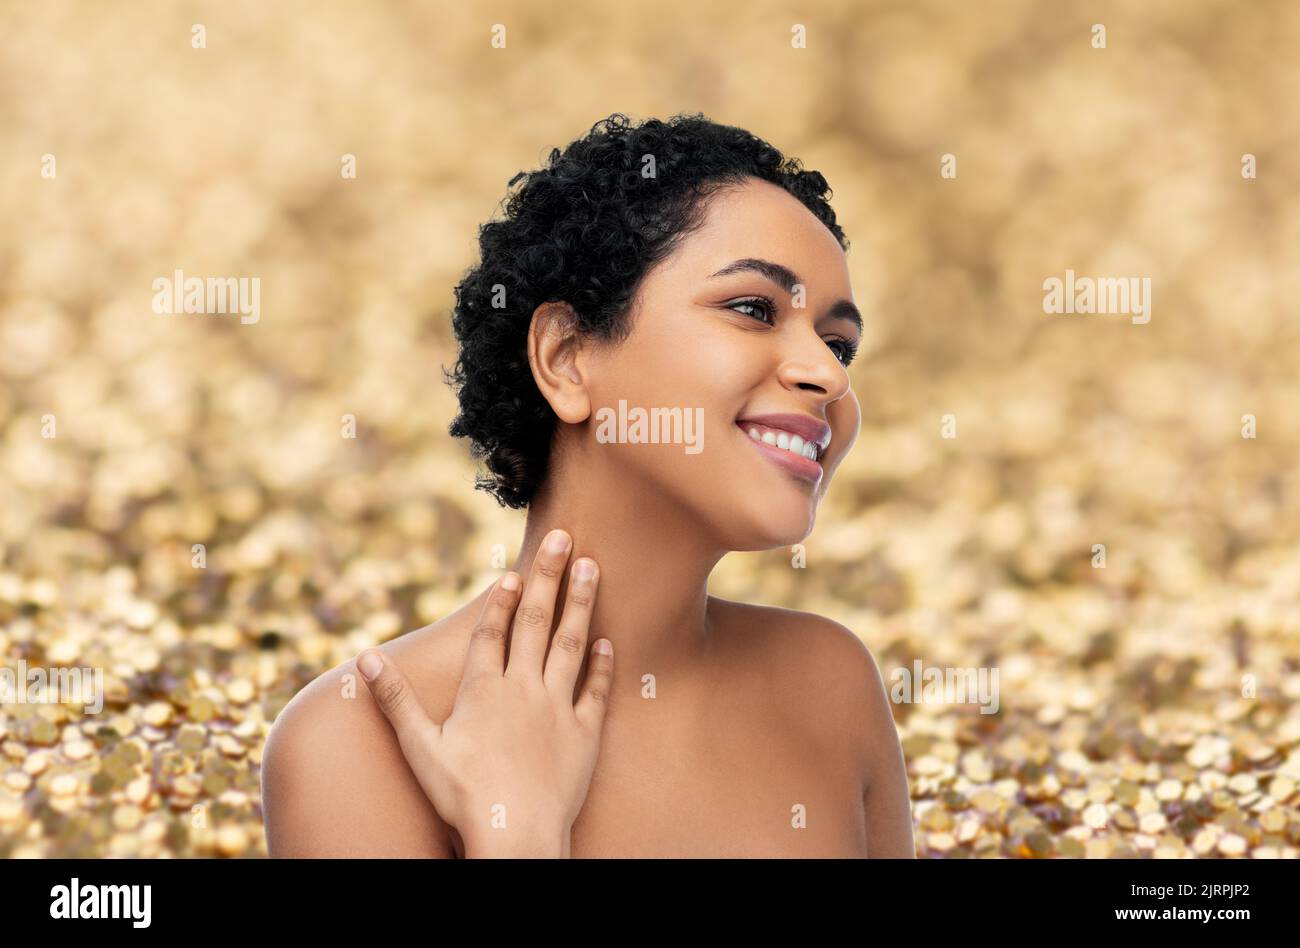 portrait of young african american woman Stock Photo